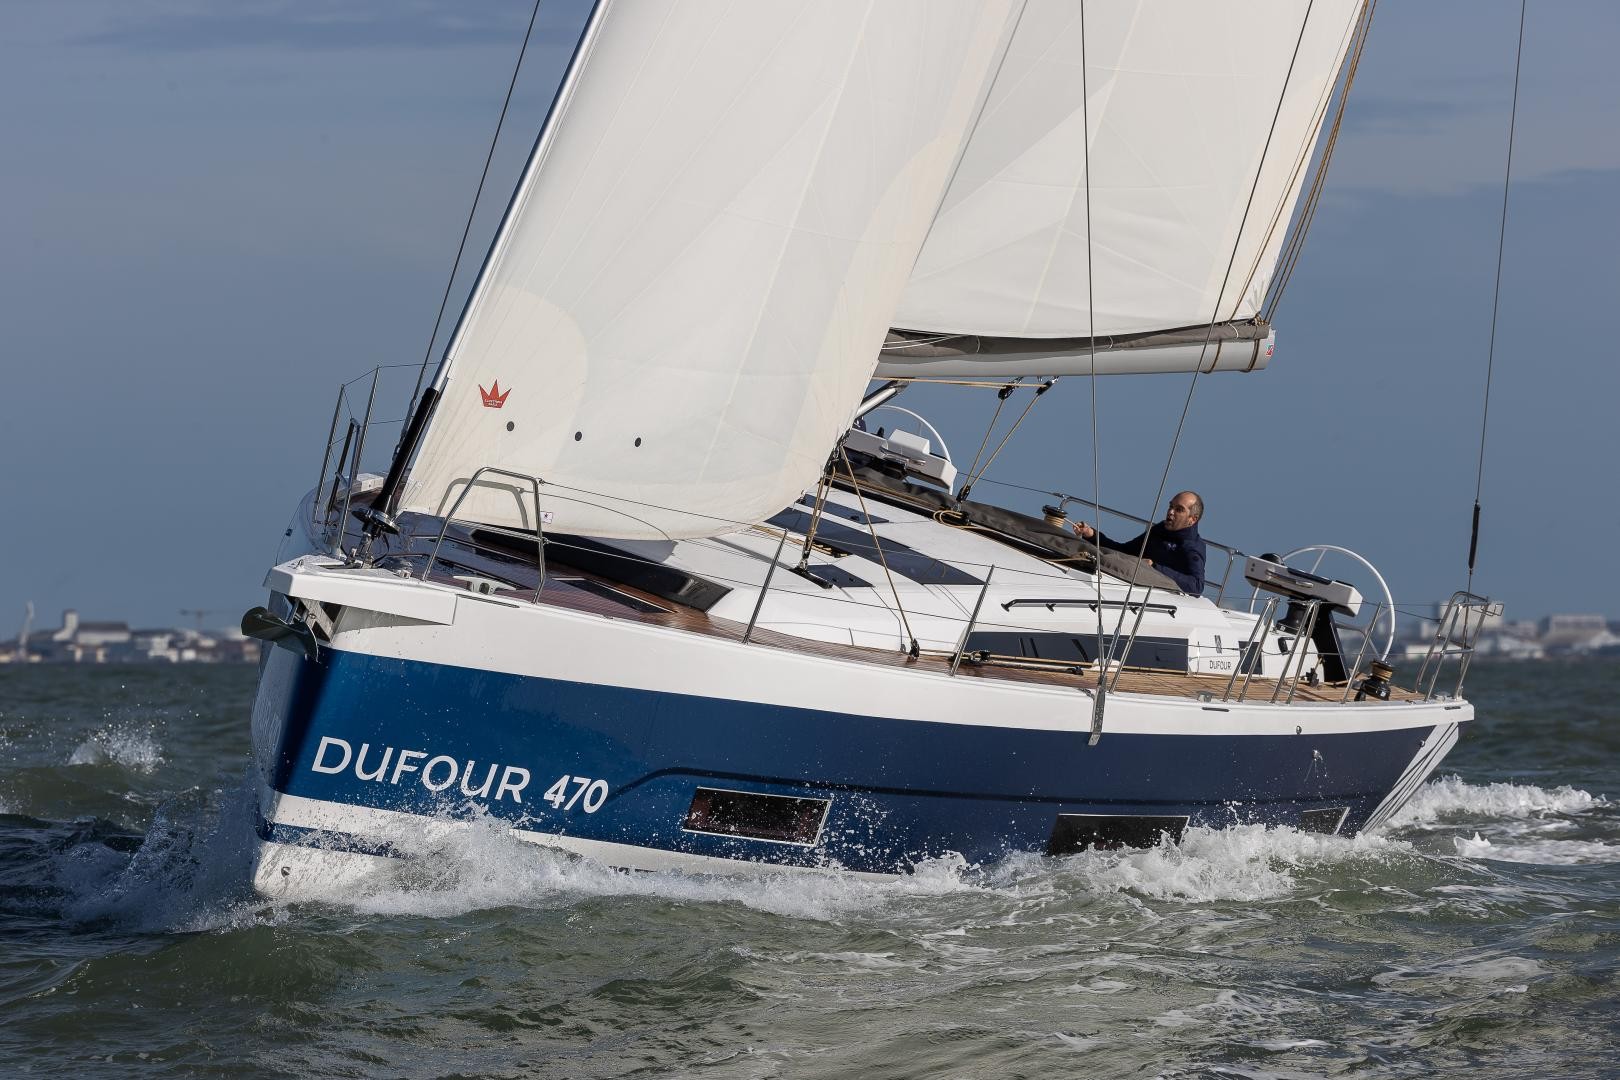 Dufour Yachts launch 2 new models: Dufour 470 and the Dufour 61